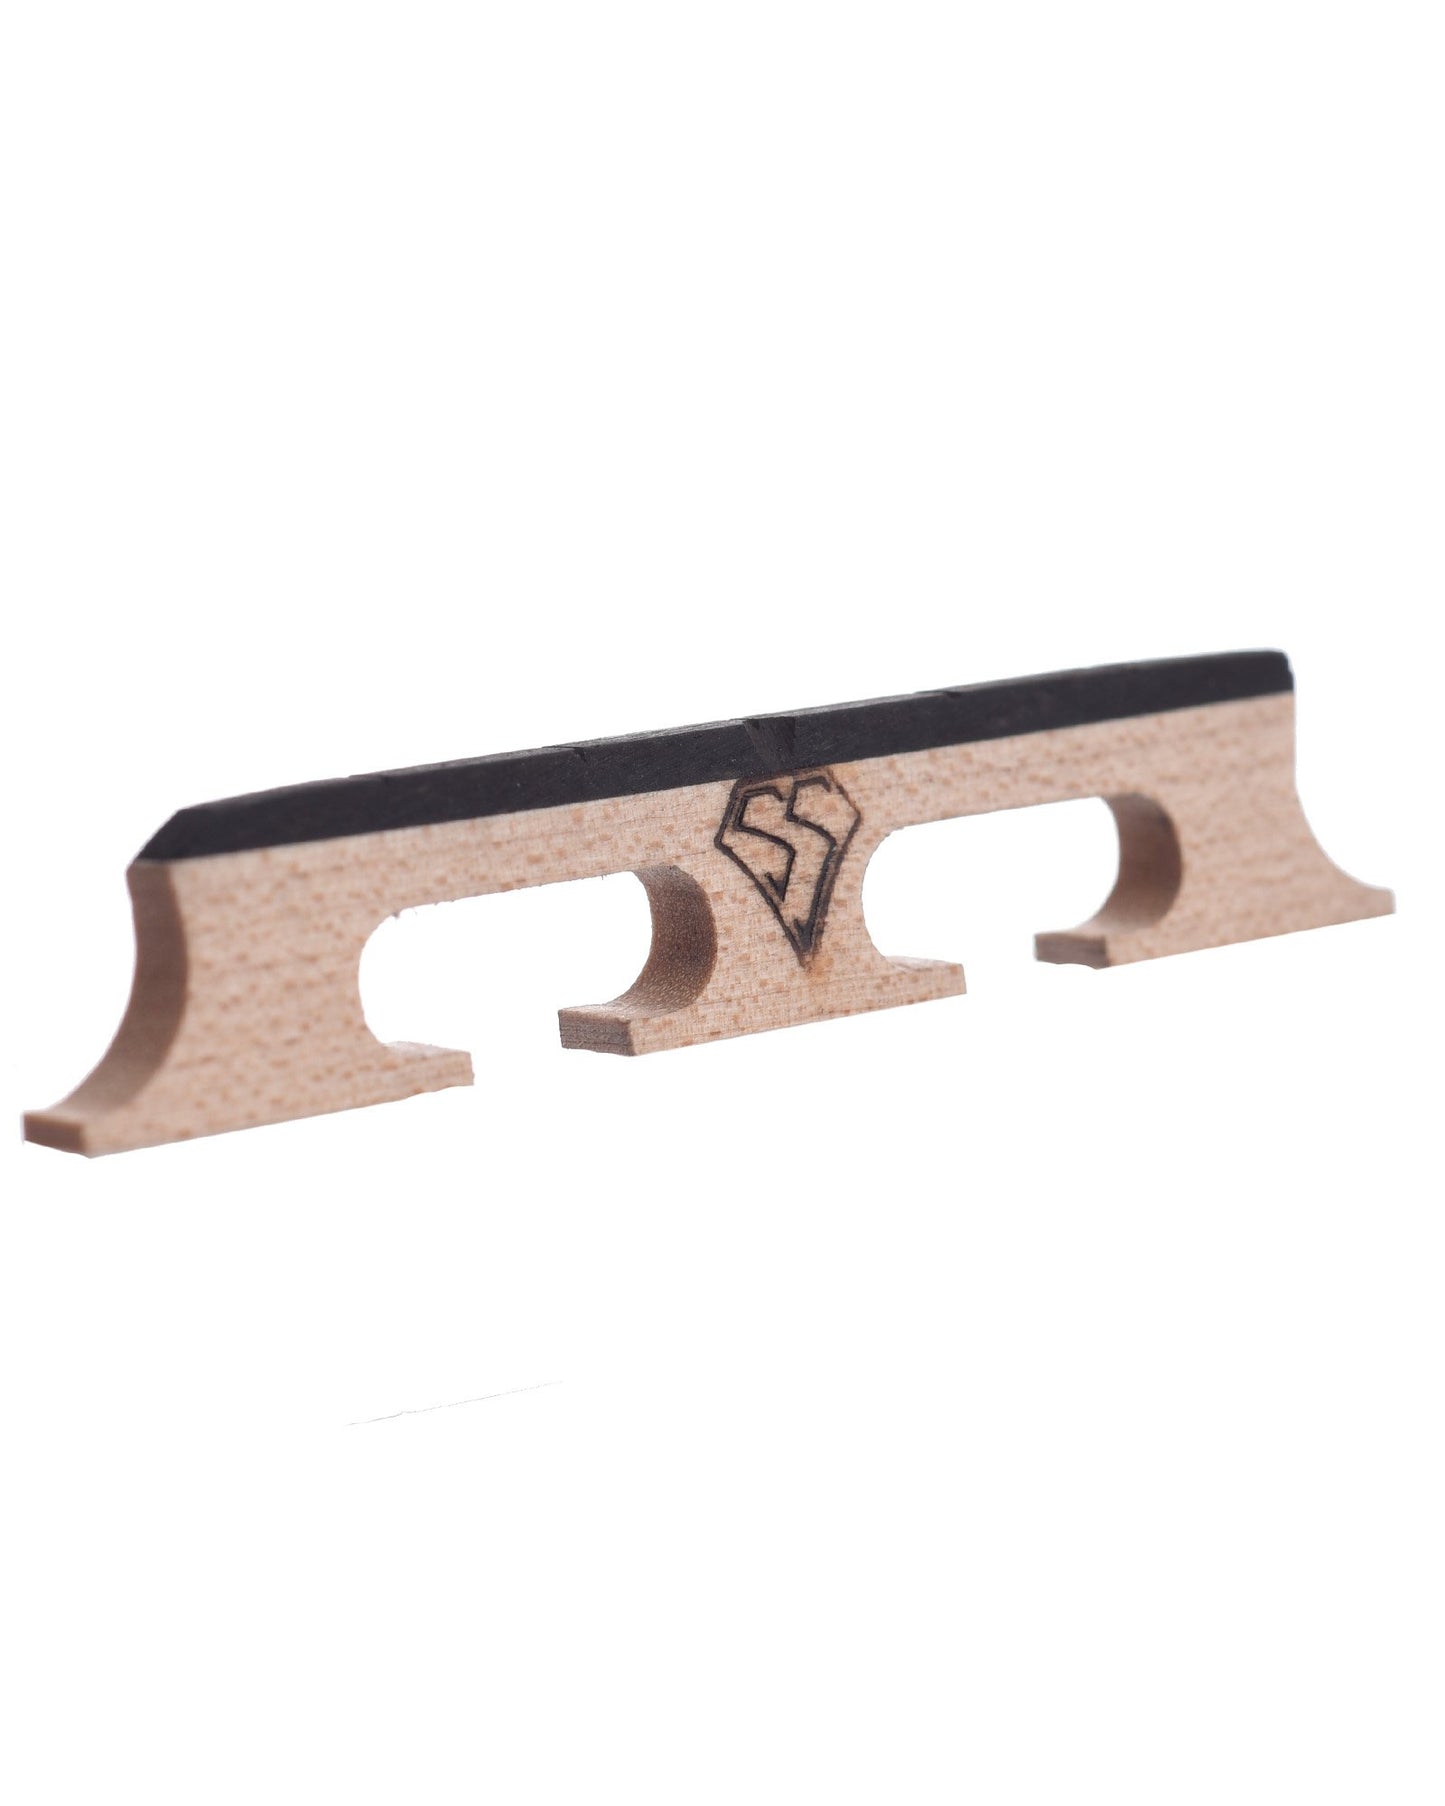 Front and Side of Snuffy Smith New Generation Banjo Bridge, Compensated 1/2" Standard Spaced